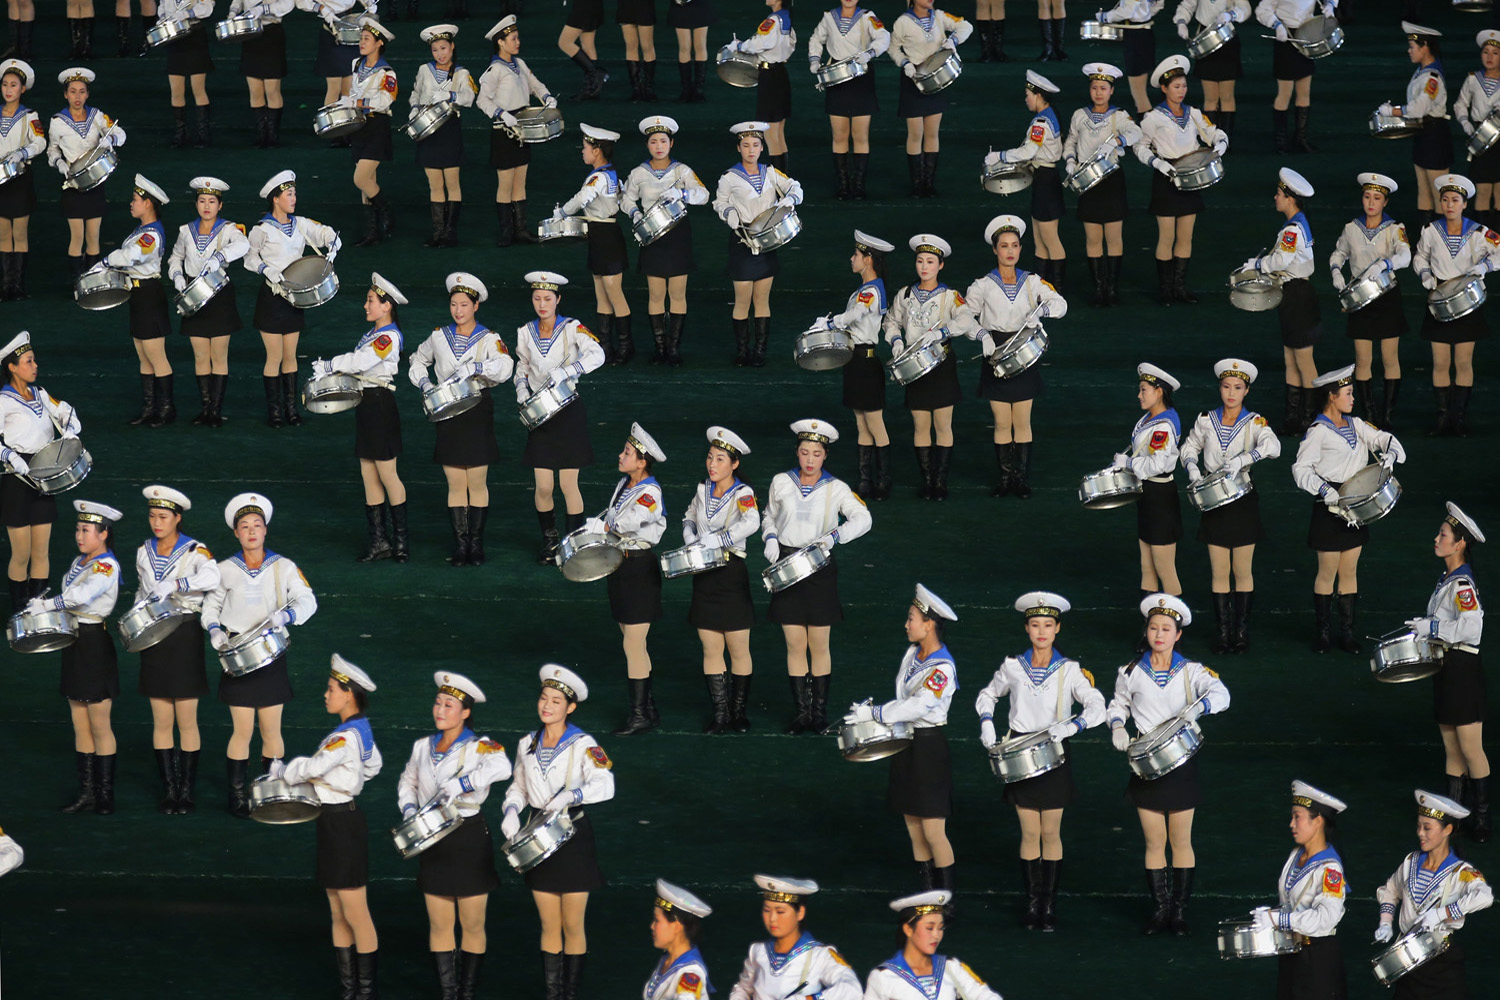 Performers participate in the Arirang mass games in Pyongyang, Jul. 22, 2013. The performance is timed for the 60th anniversary of the end of the Korean War and featured new scenes focusing on Kim Jong Un's directives.